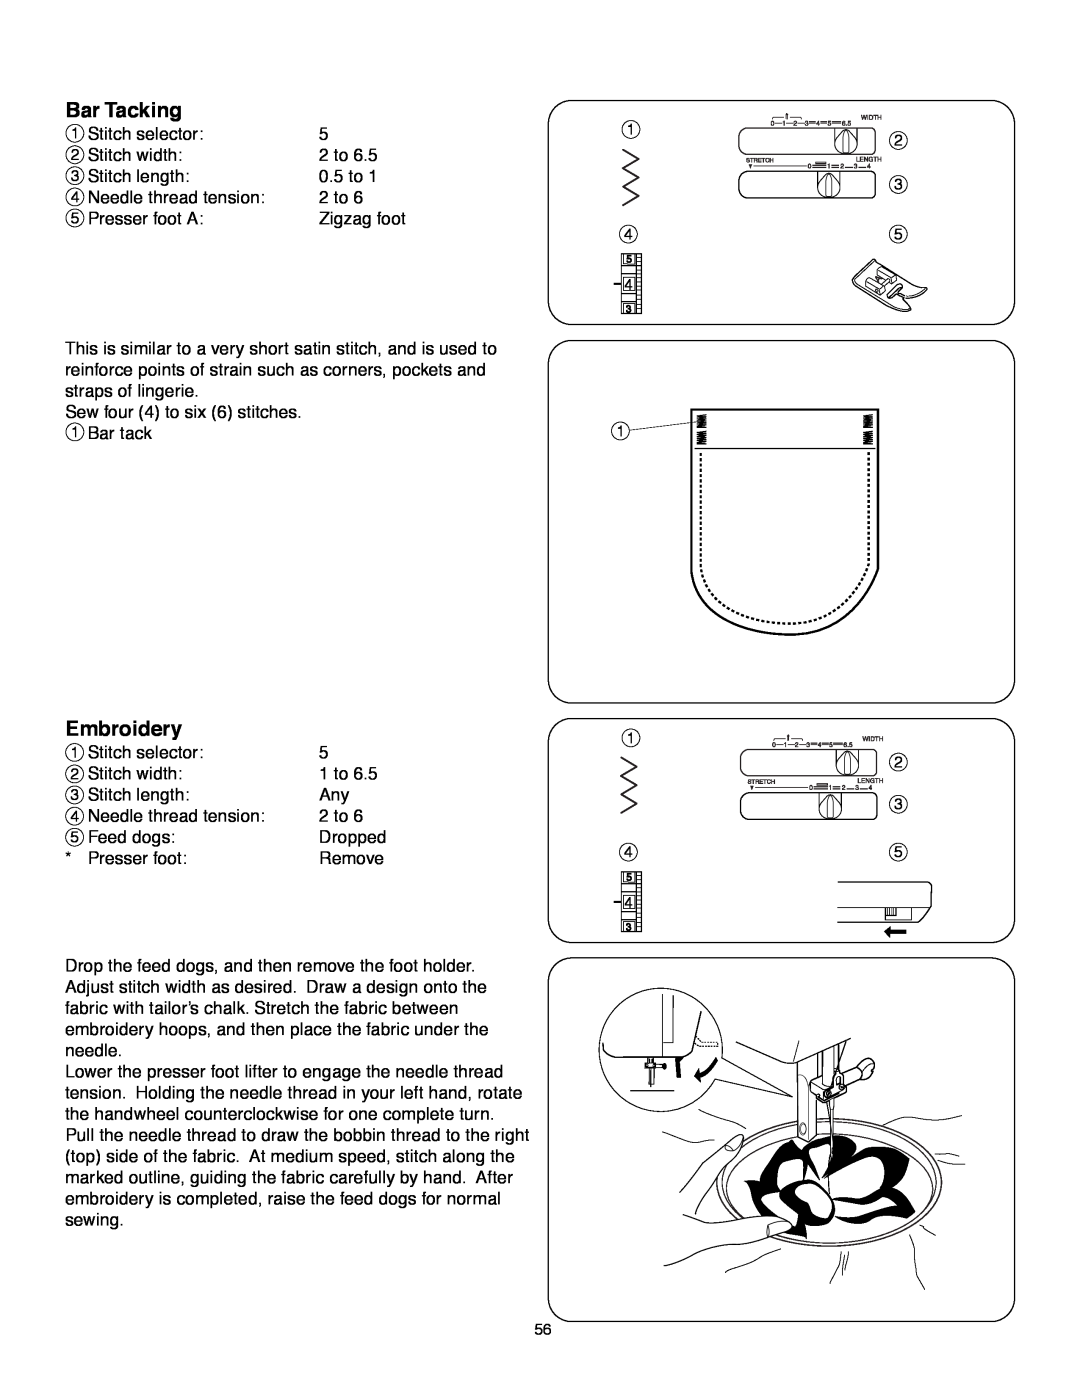 Janome MS-5027 instruction manual Bar Tacking, Embroidery 